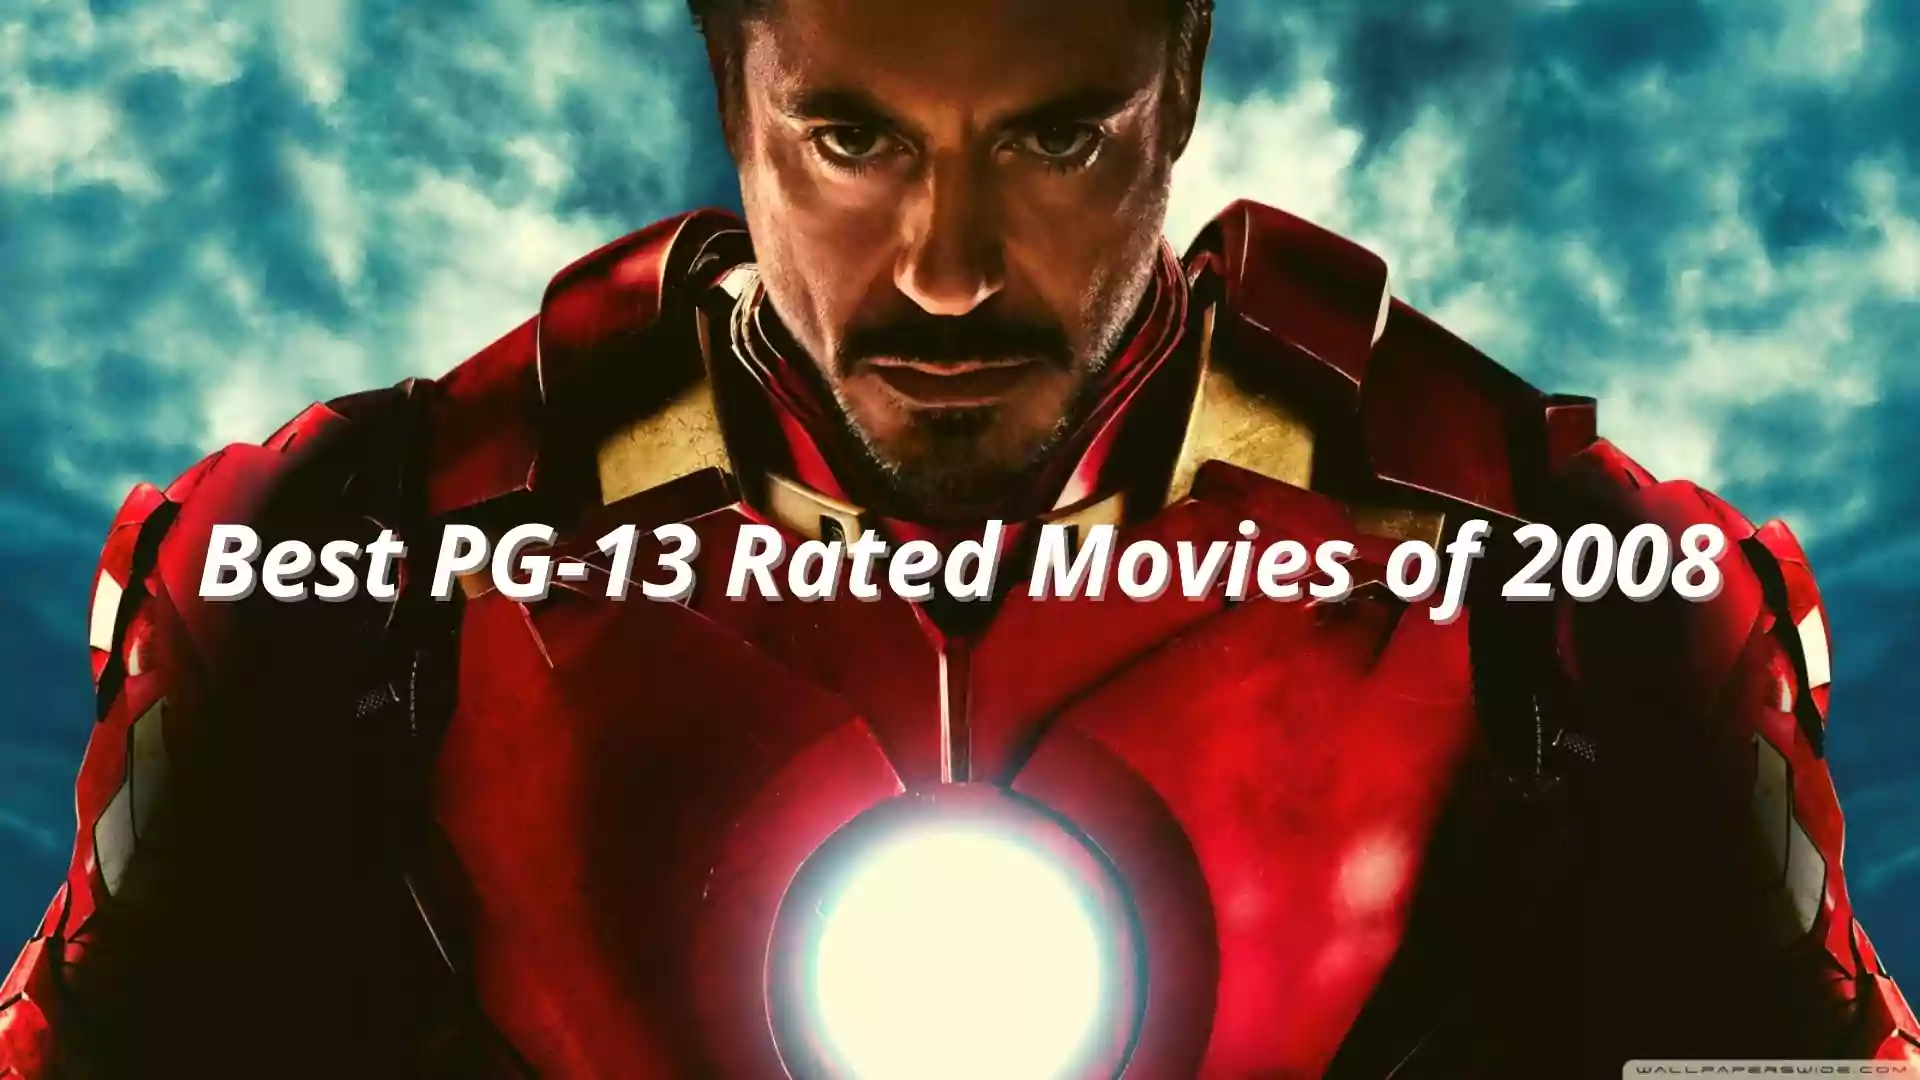 Best PG-13 Rated Movies of 2008